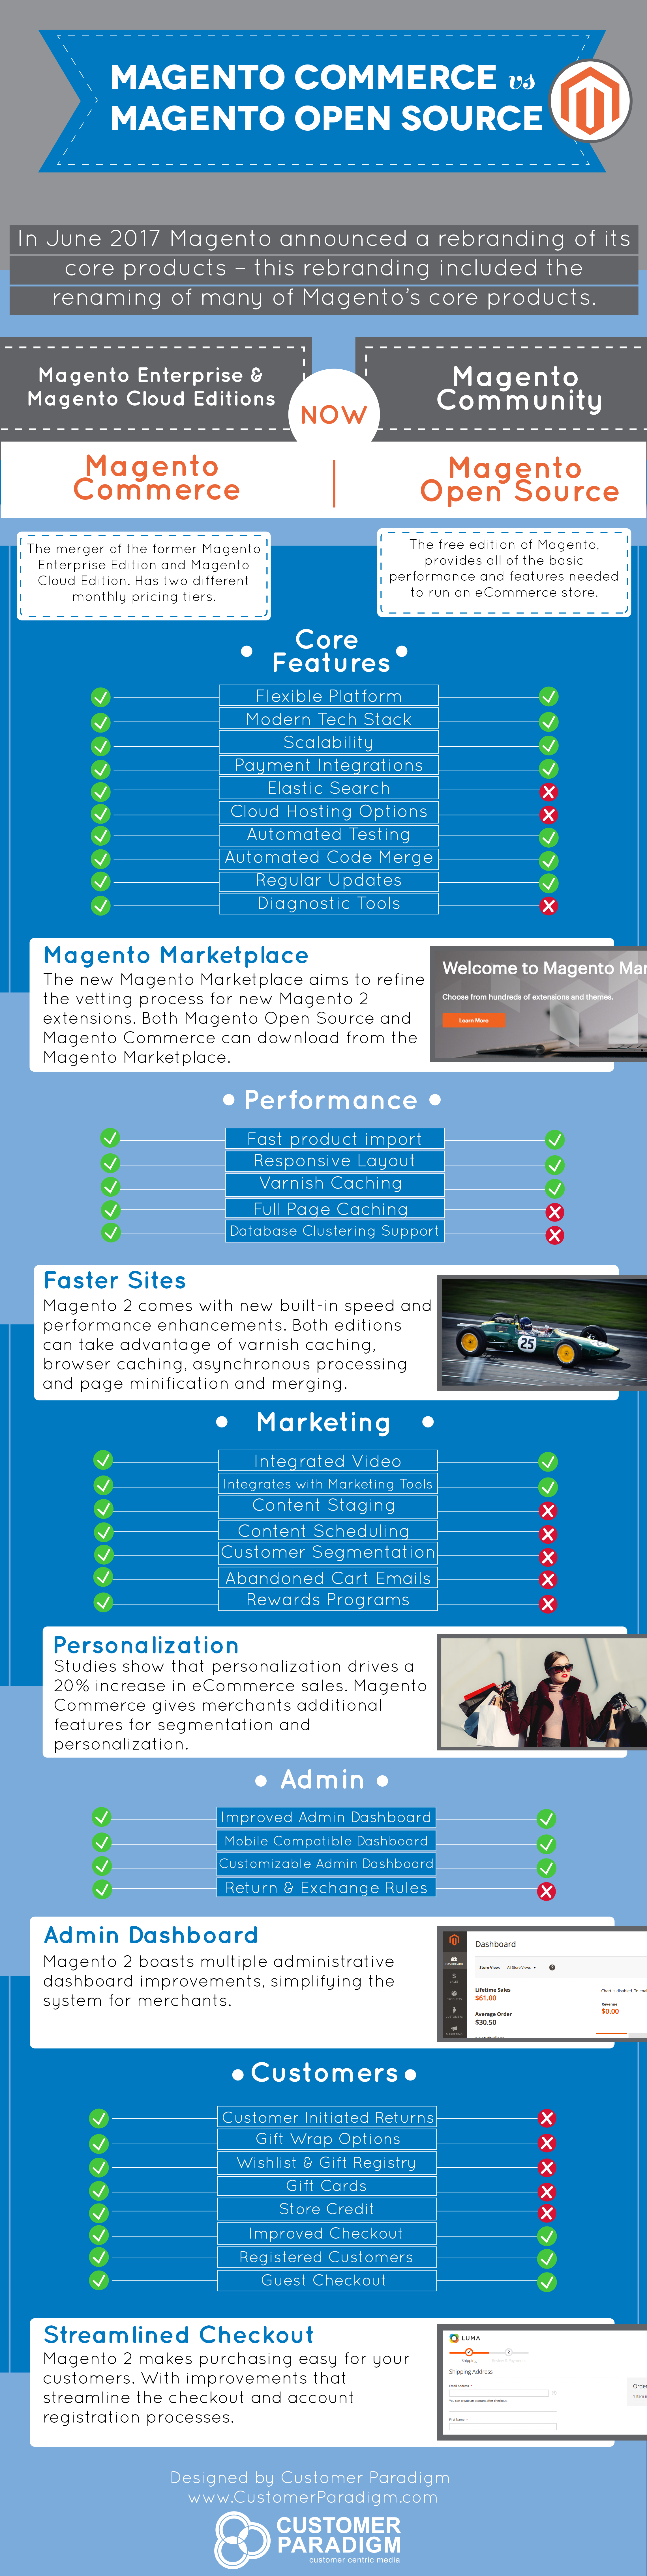 Infographic comparing the differences between Magento Open Source and Magento Commerce